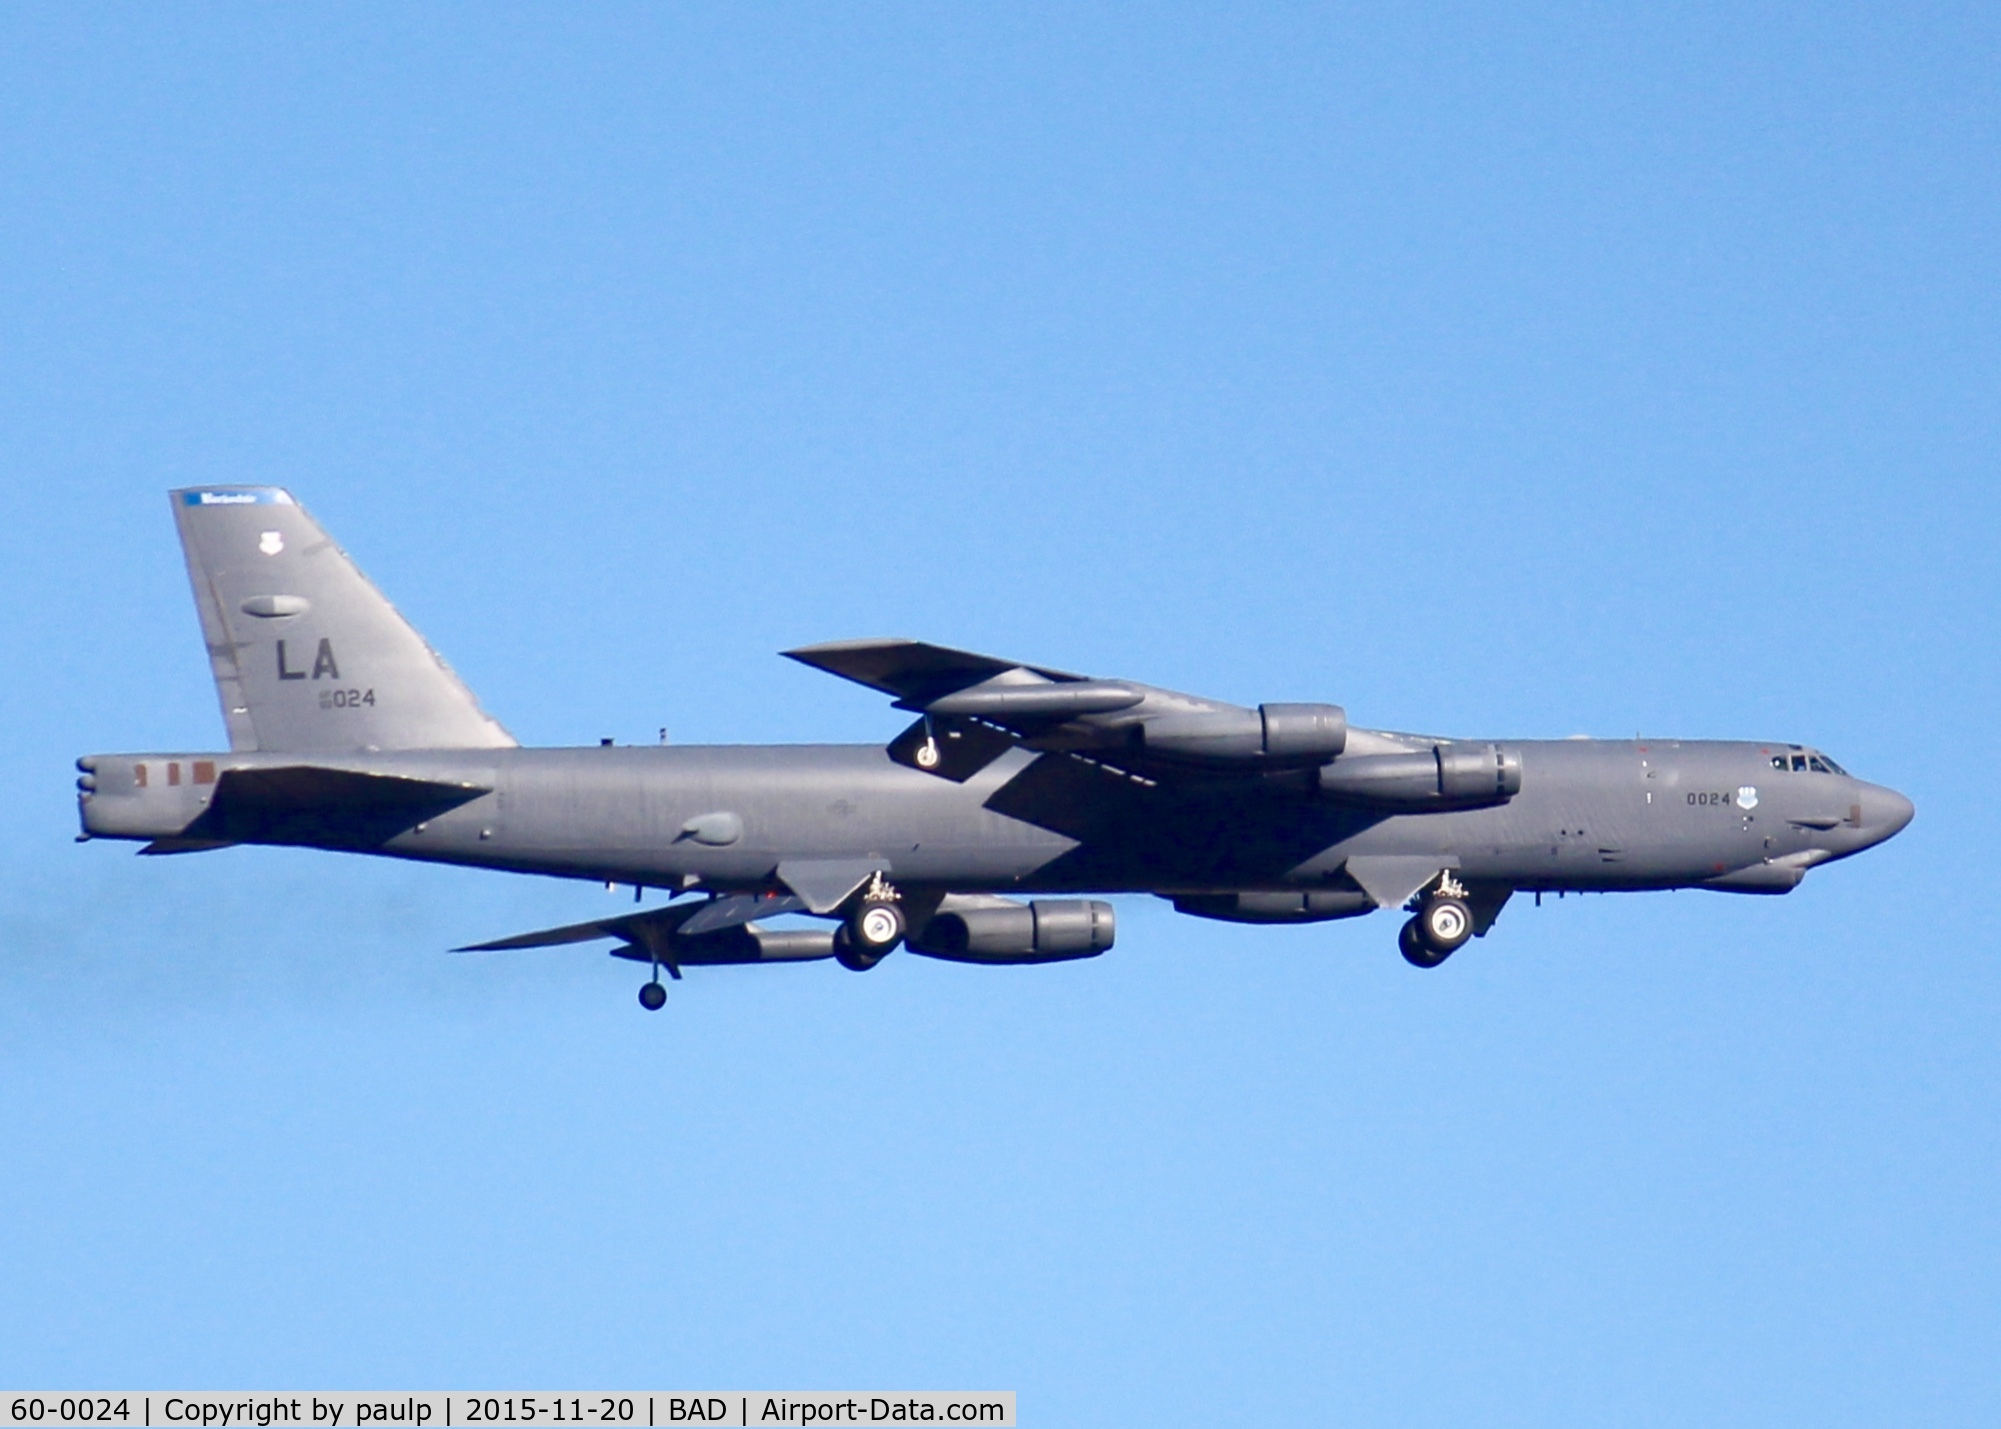 60-0024, 1960 Boeing B-52H Stratofortress C/N 464389, At Barksdale Air Force Base.